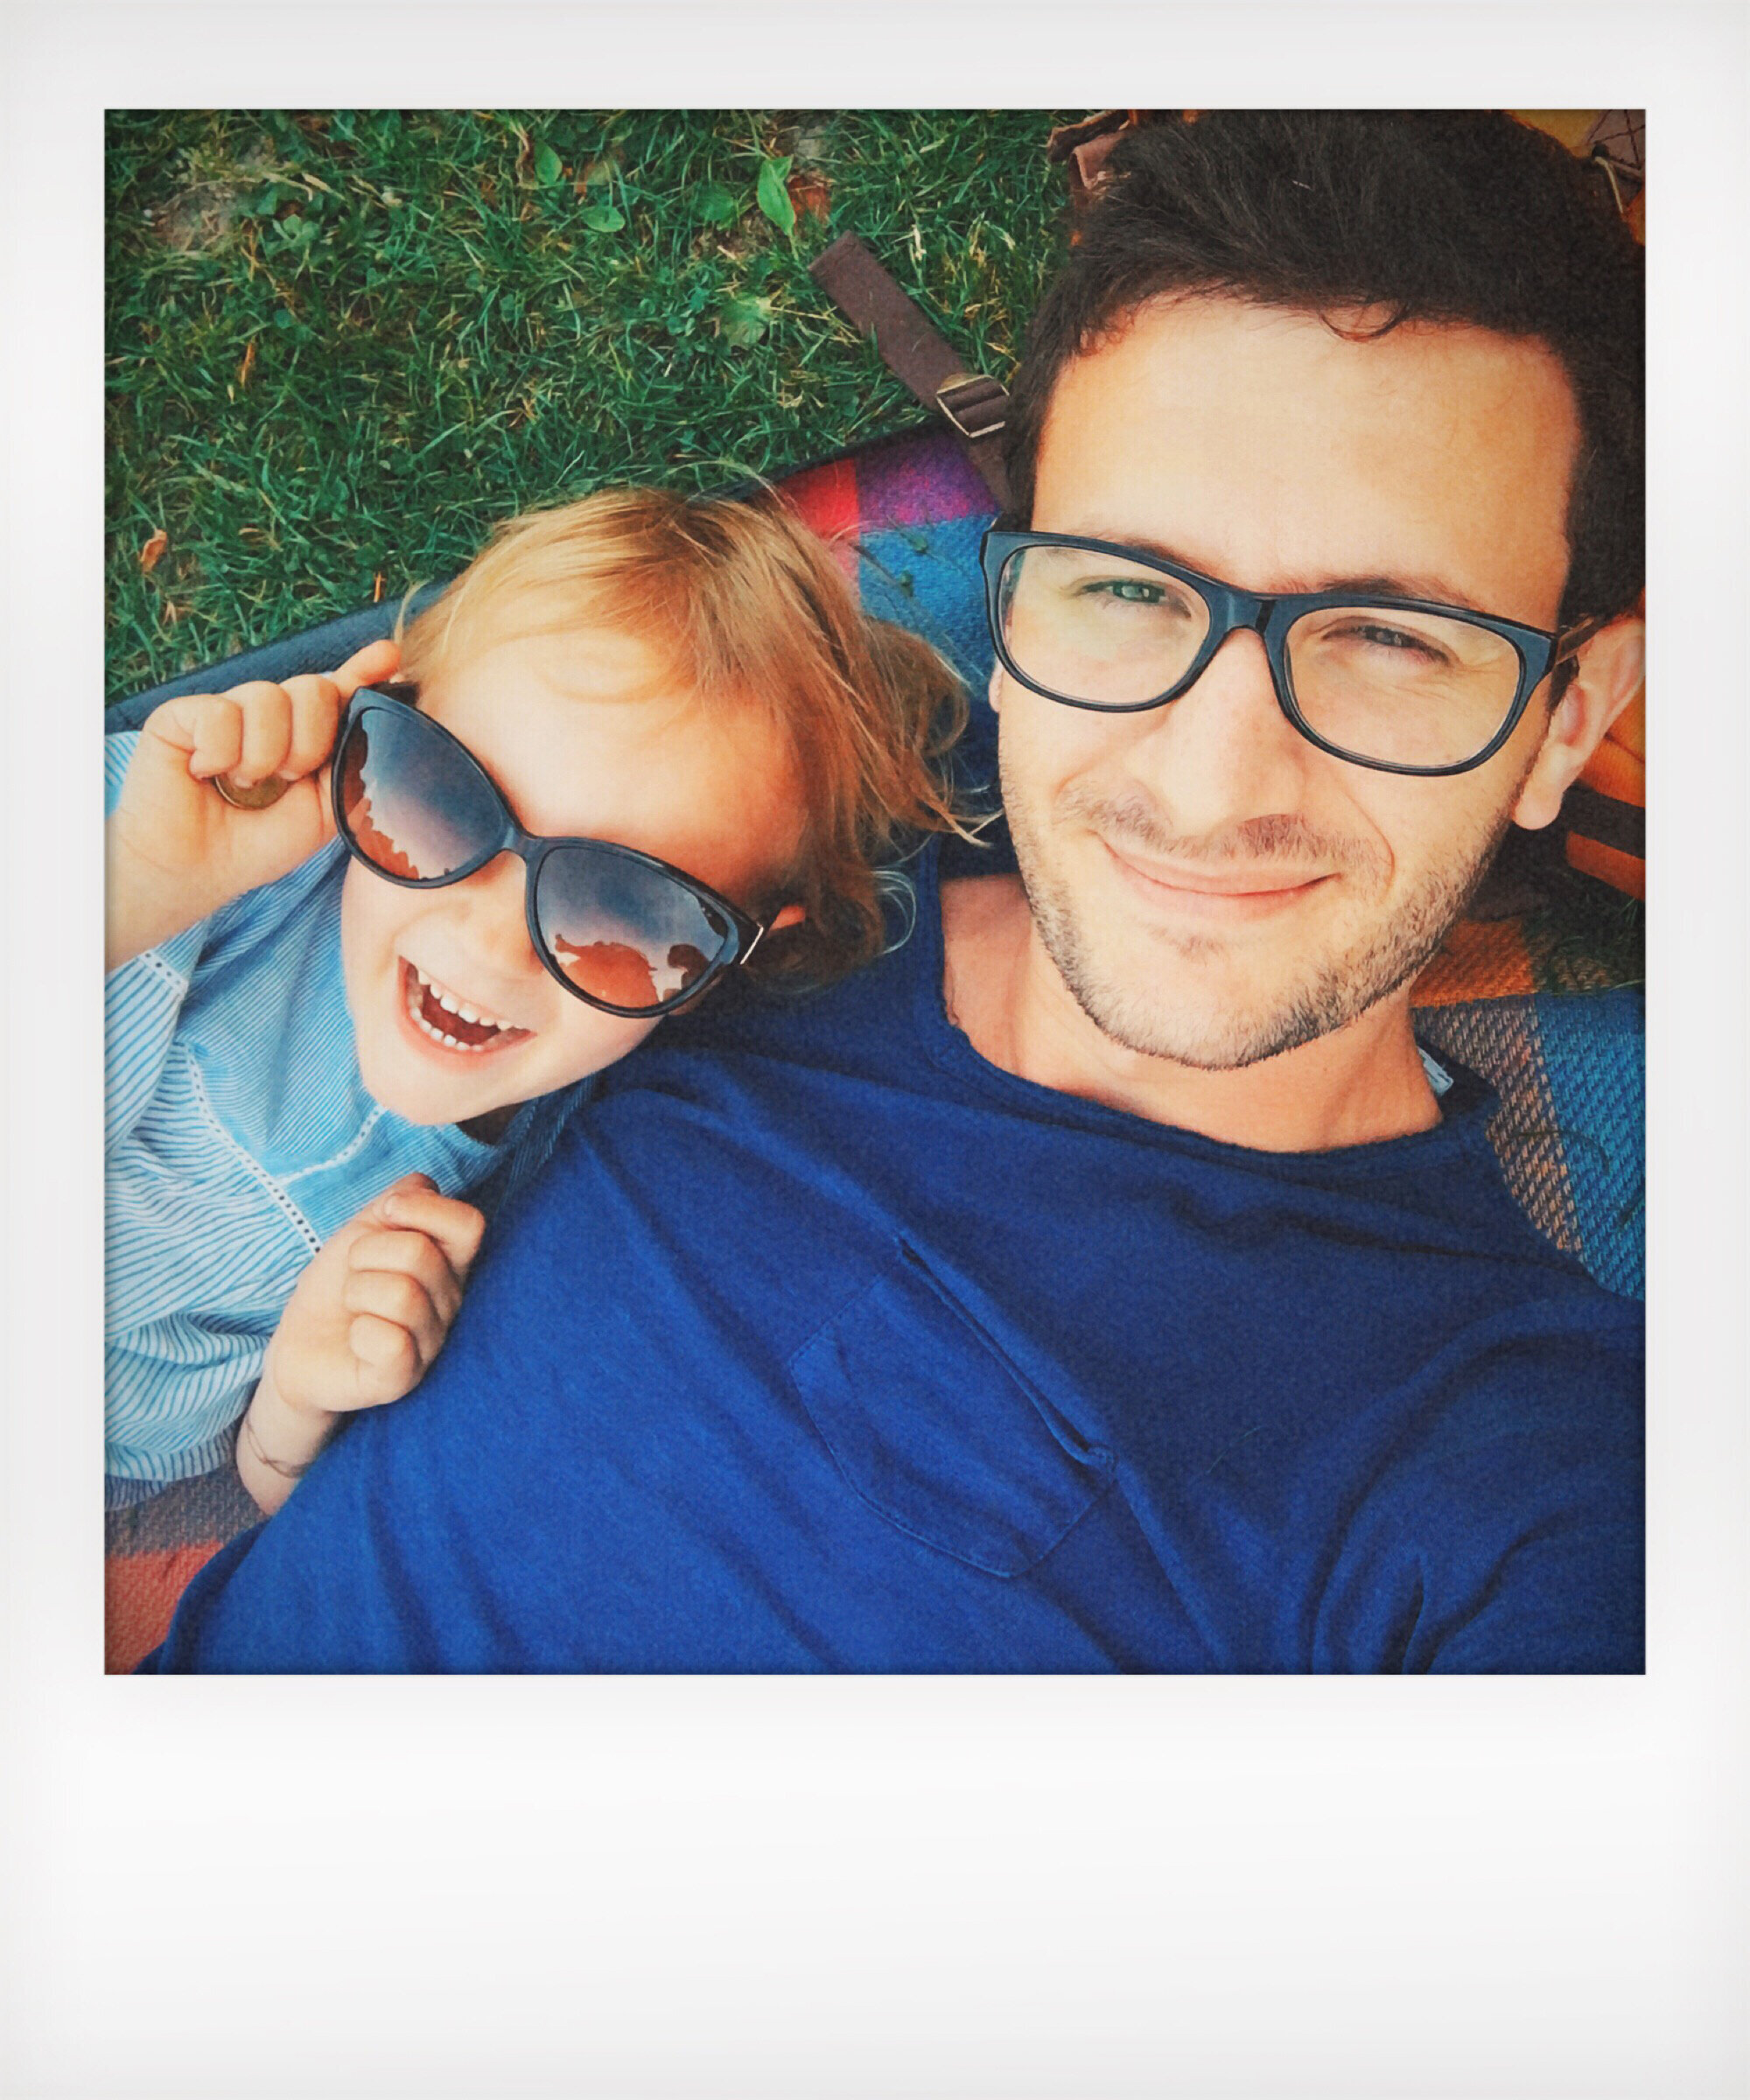 Man and child laying on grass, smiling at the camera, child wearing sunglasses